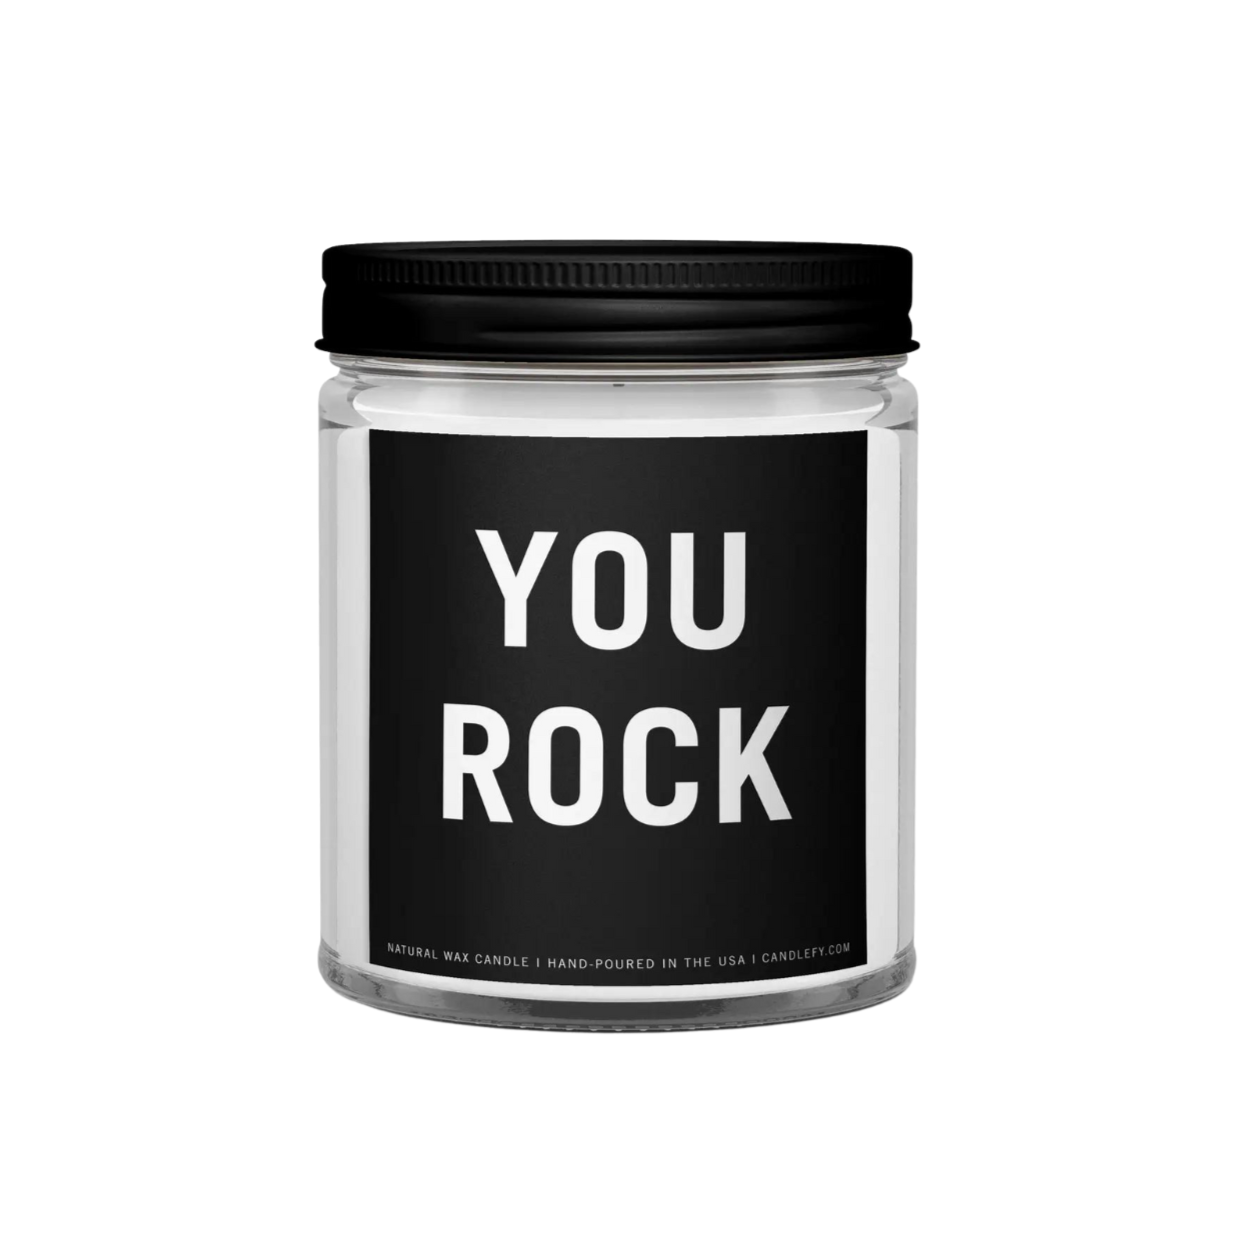 You Rock Natural Wax Candle